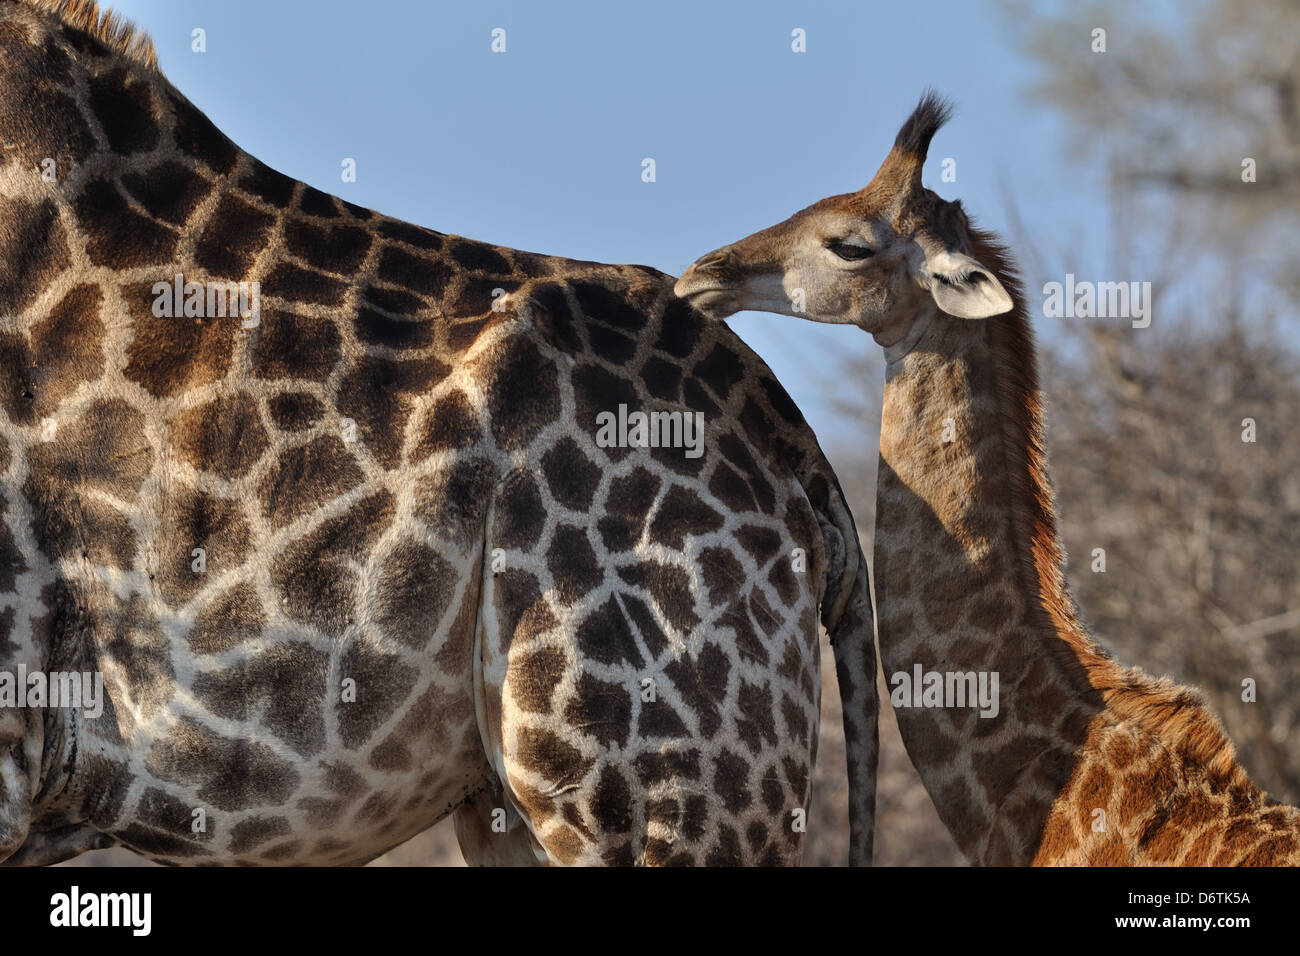 Giraffes, Giraffa camelopardalis, mother and calf, walking together, Kruger National Park, South Africa Stock Photo